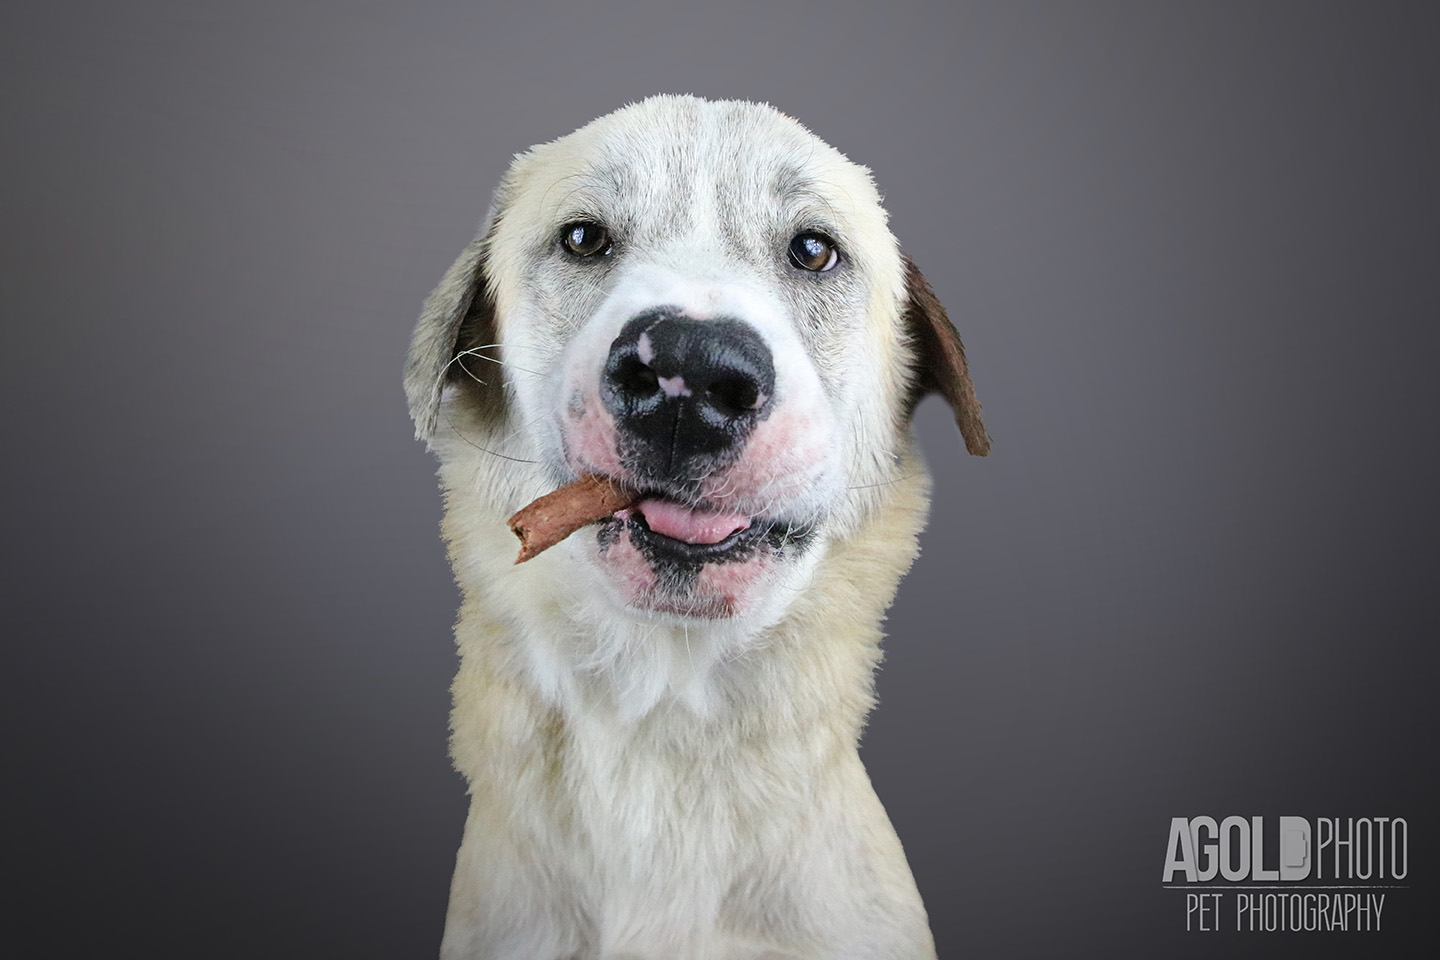 bradley_agoldphoto-tampa-pet-photography__agoldphoto-tampa-pet-photography_